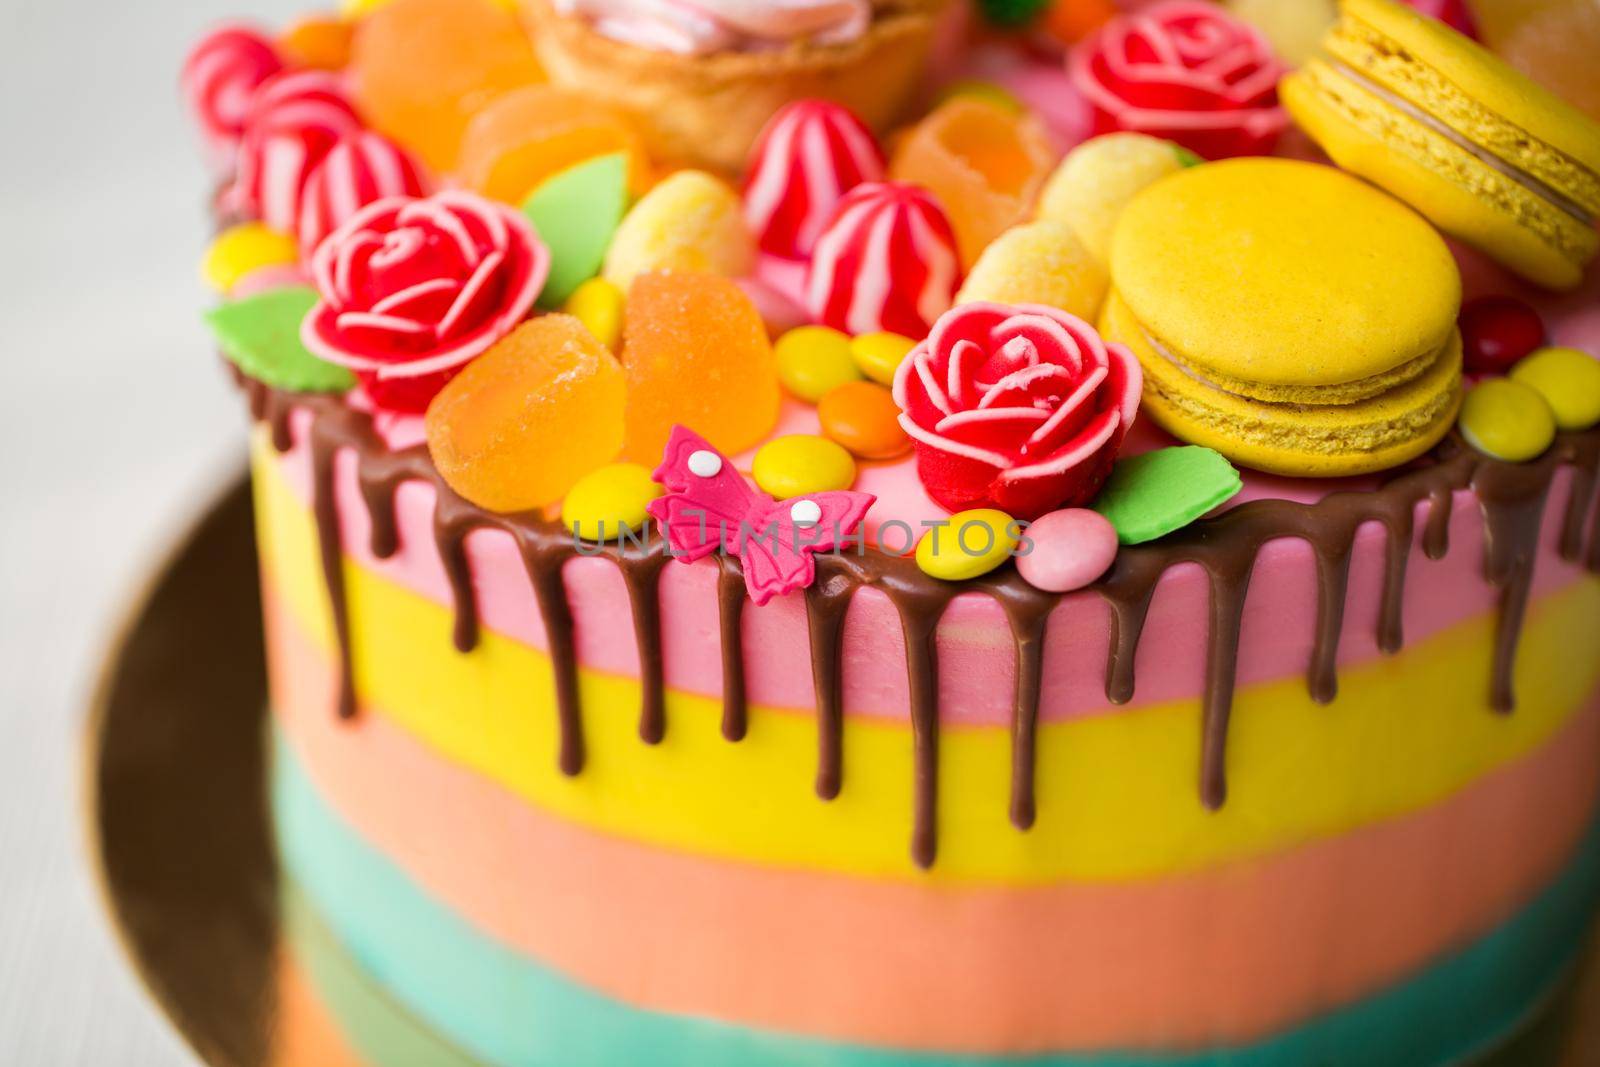 Colourful cake for a kid's birthday party with Lollipop, candy, marmalade, cupcakes and Bunny